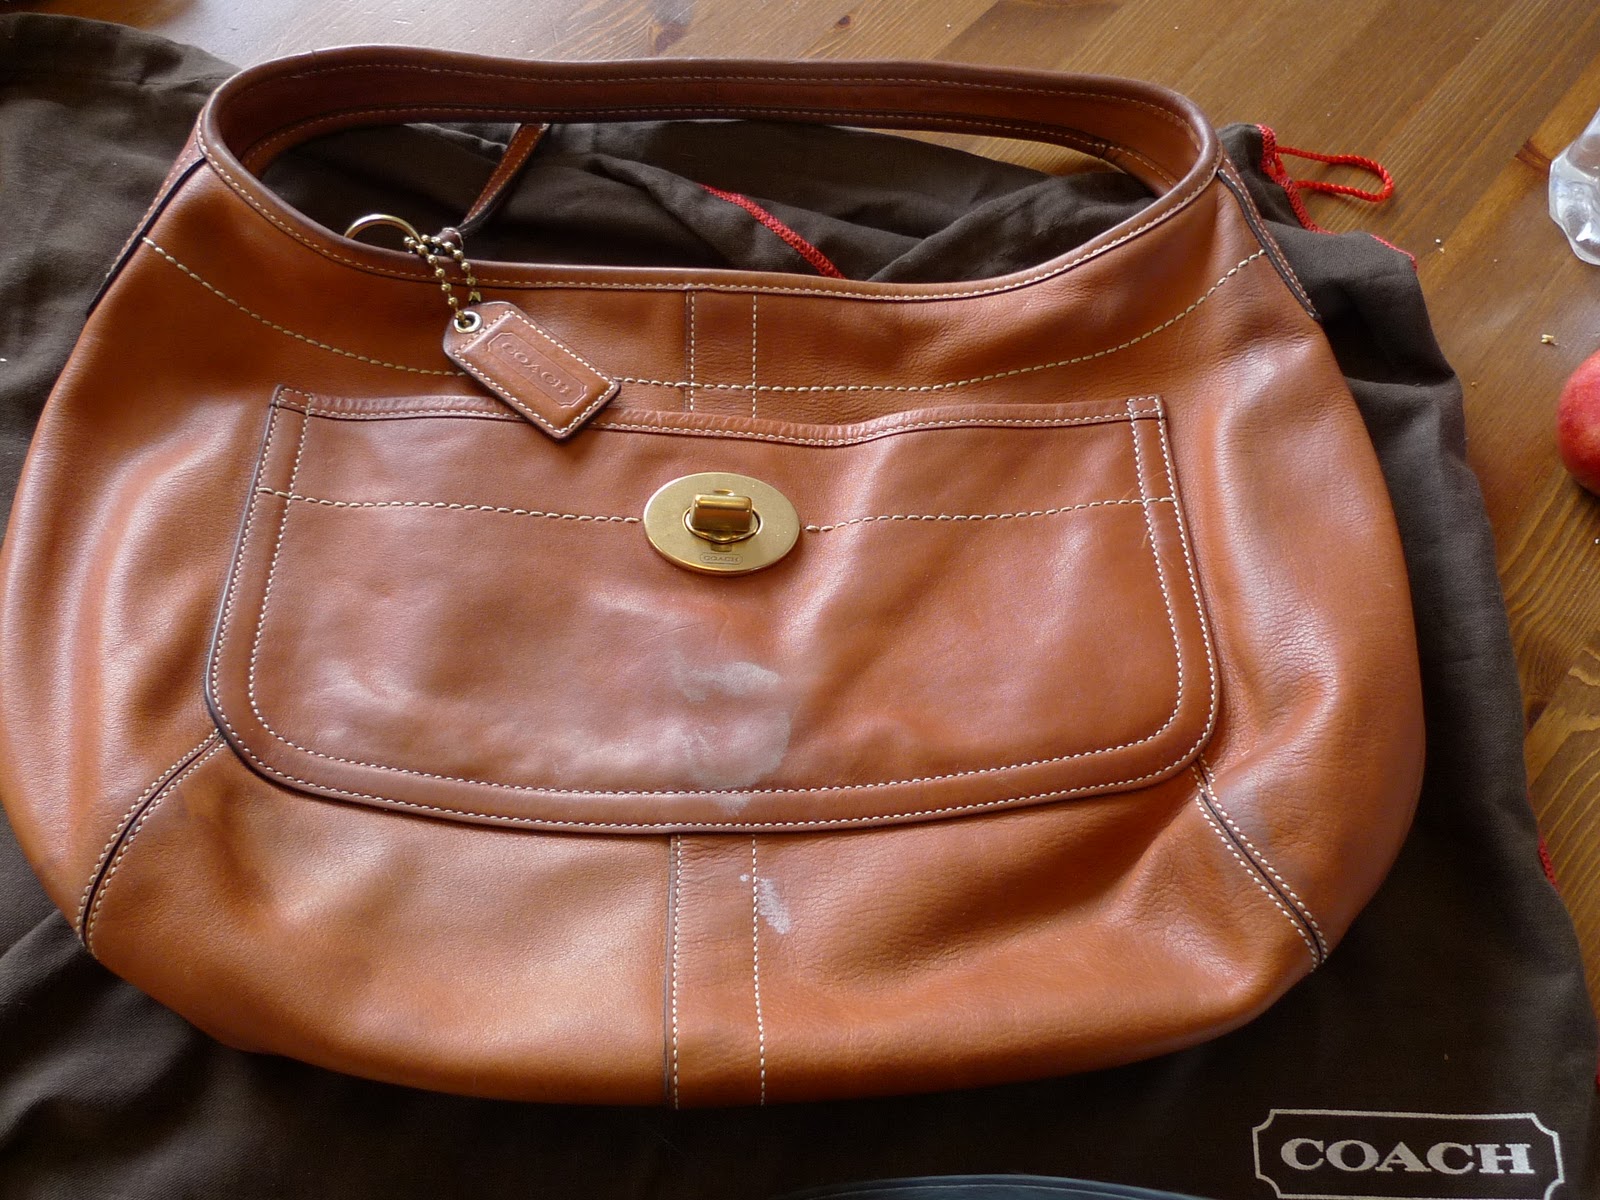 Simplicity is the New Black: Coach Bags - Great Service